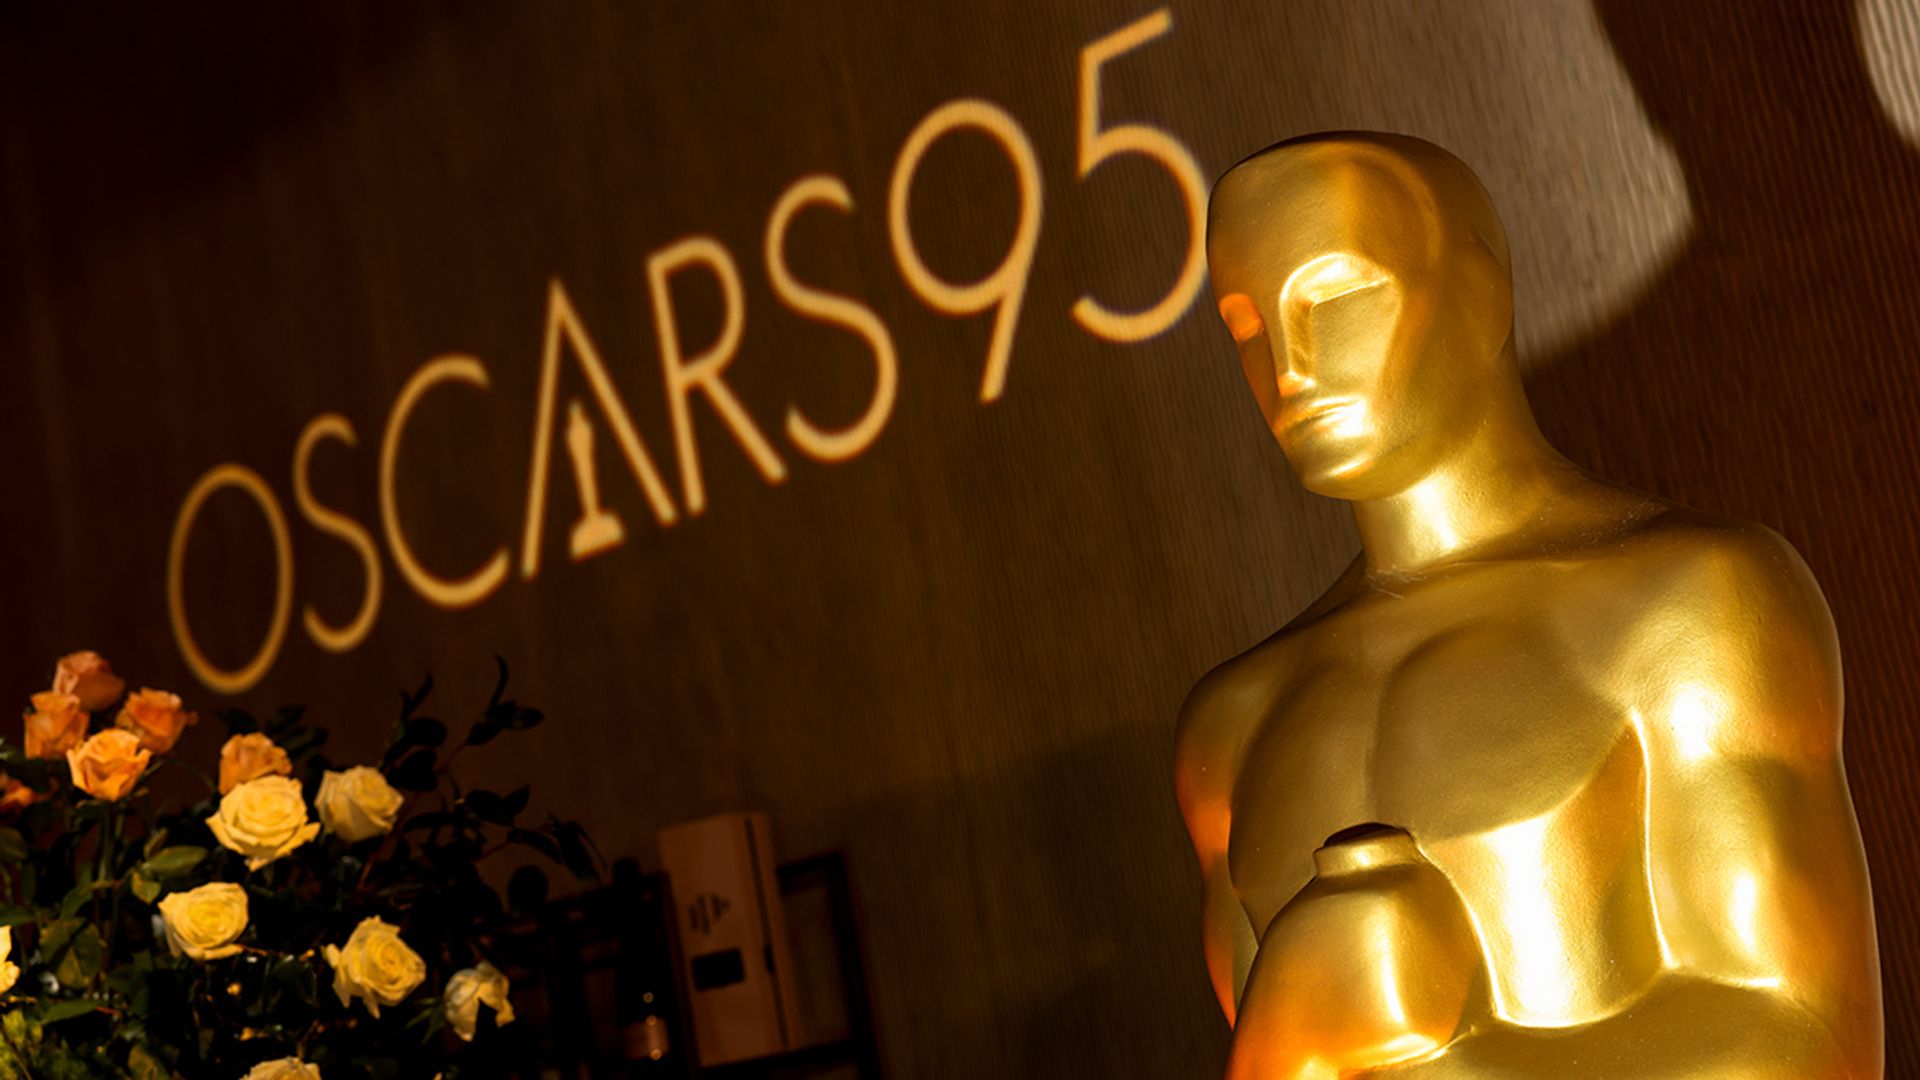 Here's How Much an Oscar Statue Is Really Worth